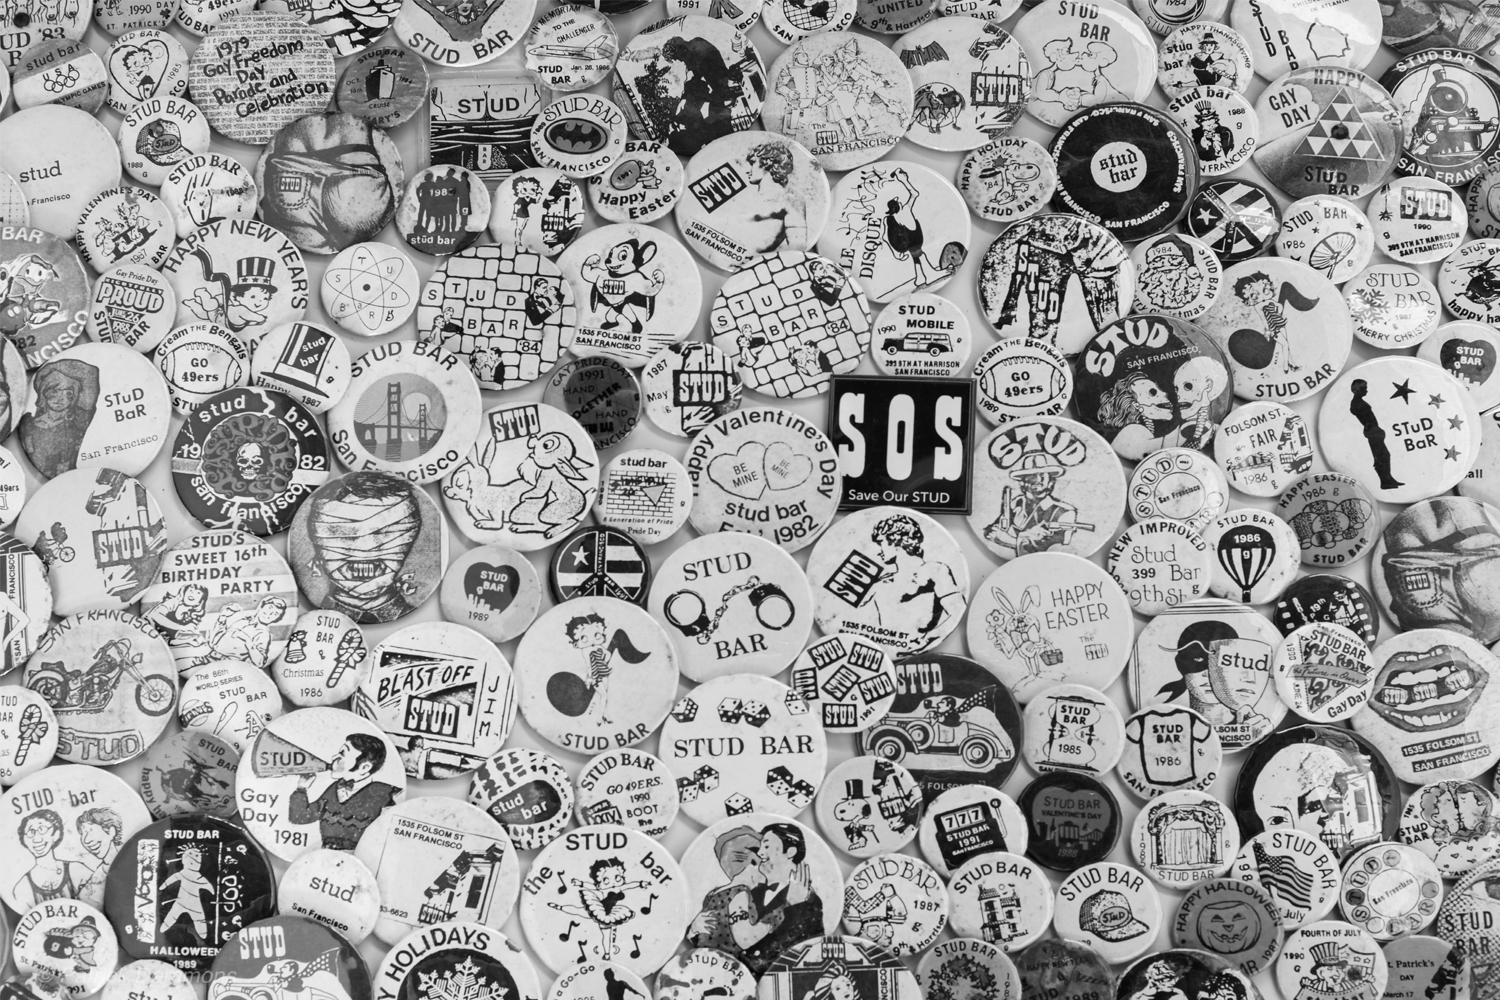 Black and white image of crowded sea of round pins with graphics advertising parties or the bar